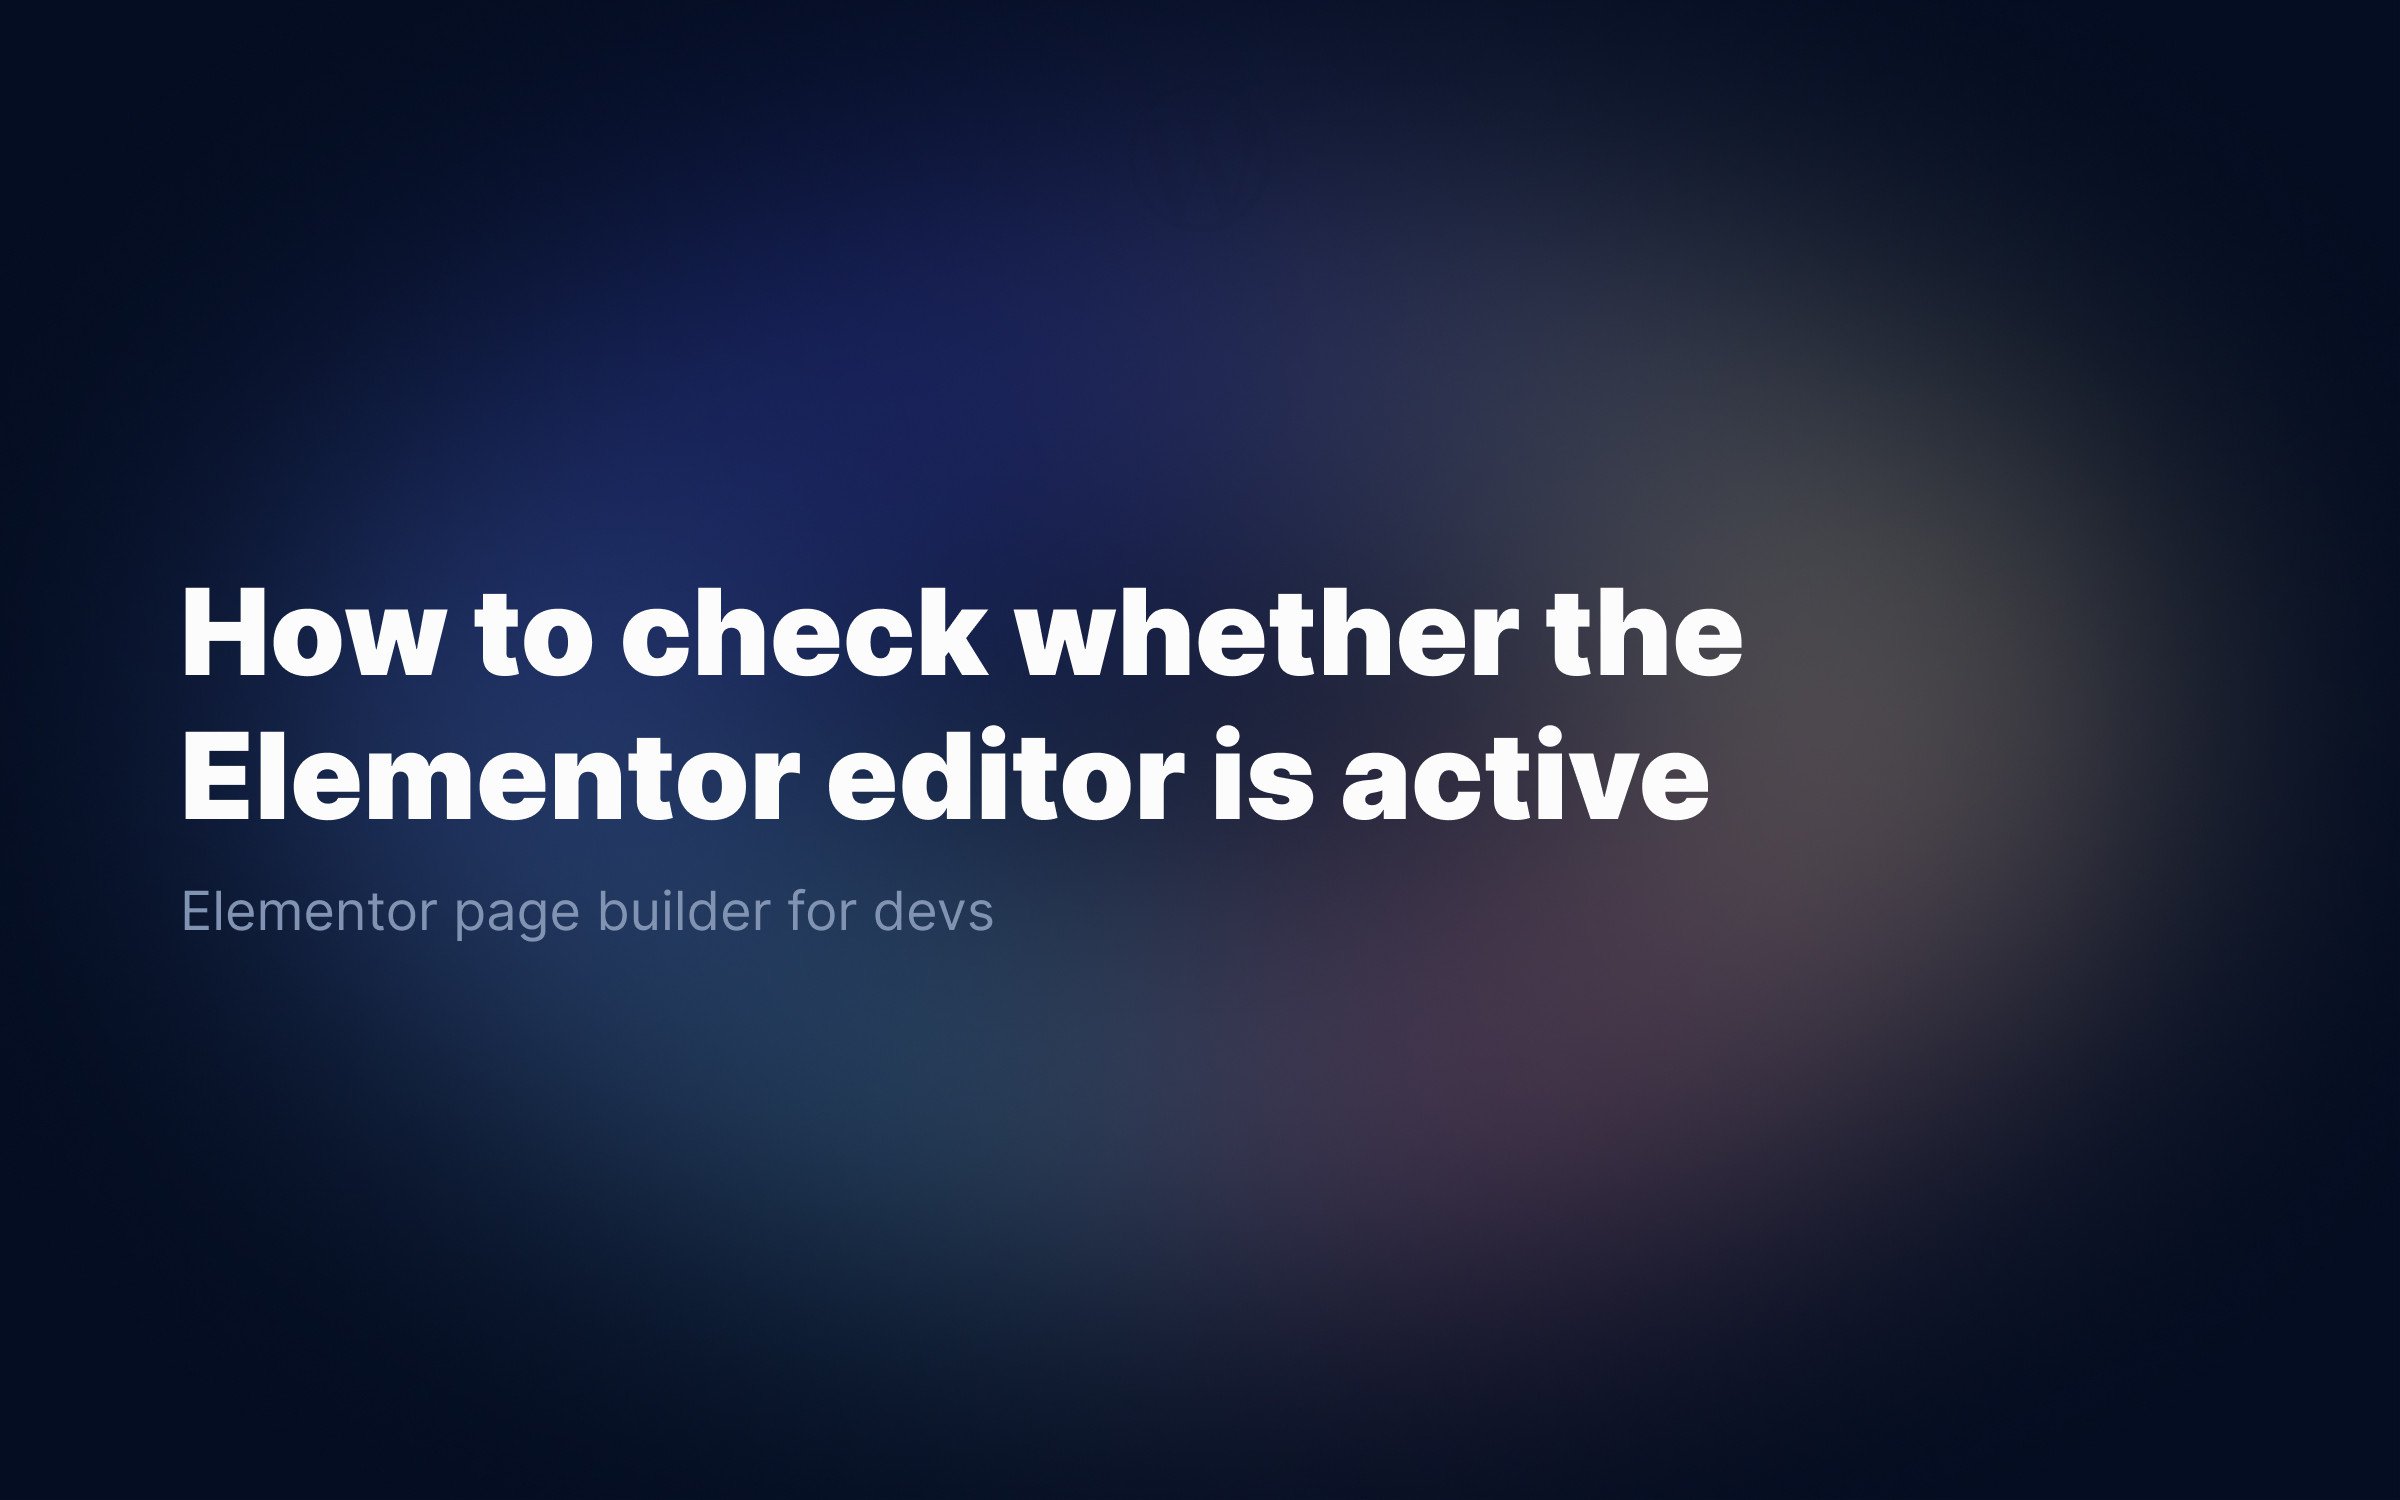 How to check whether the Elementor editor is active